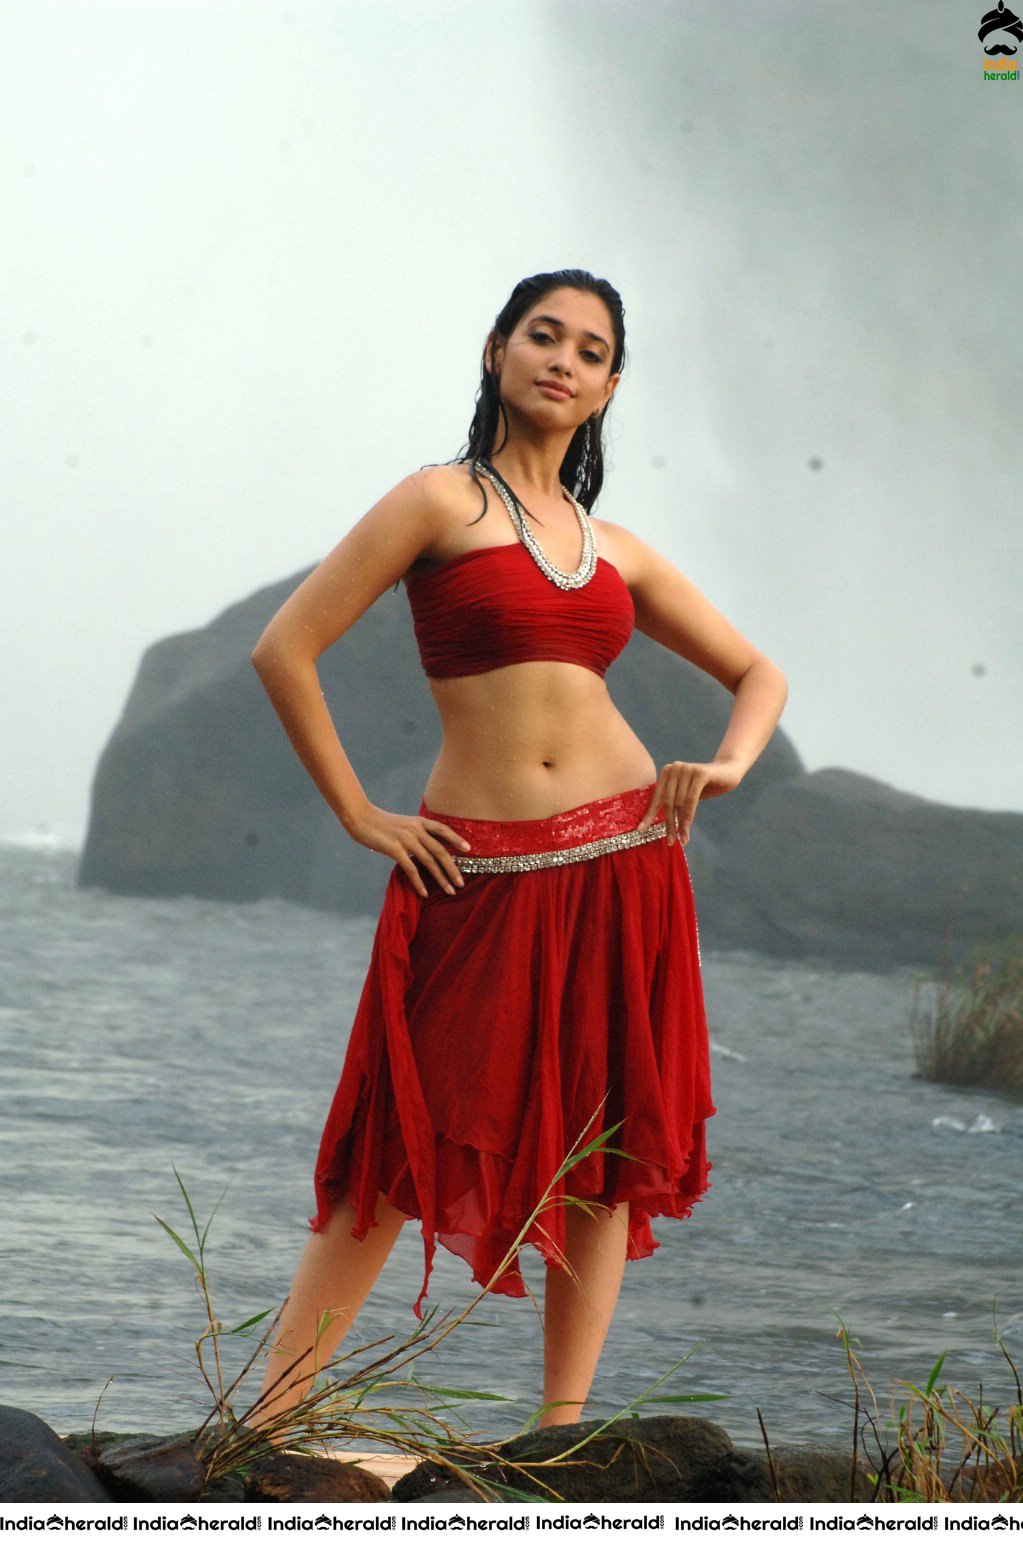 Tamannaah Hot Milky White Body Show by Getting Wet in the Rain Set 3